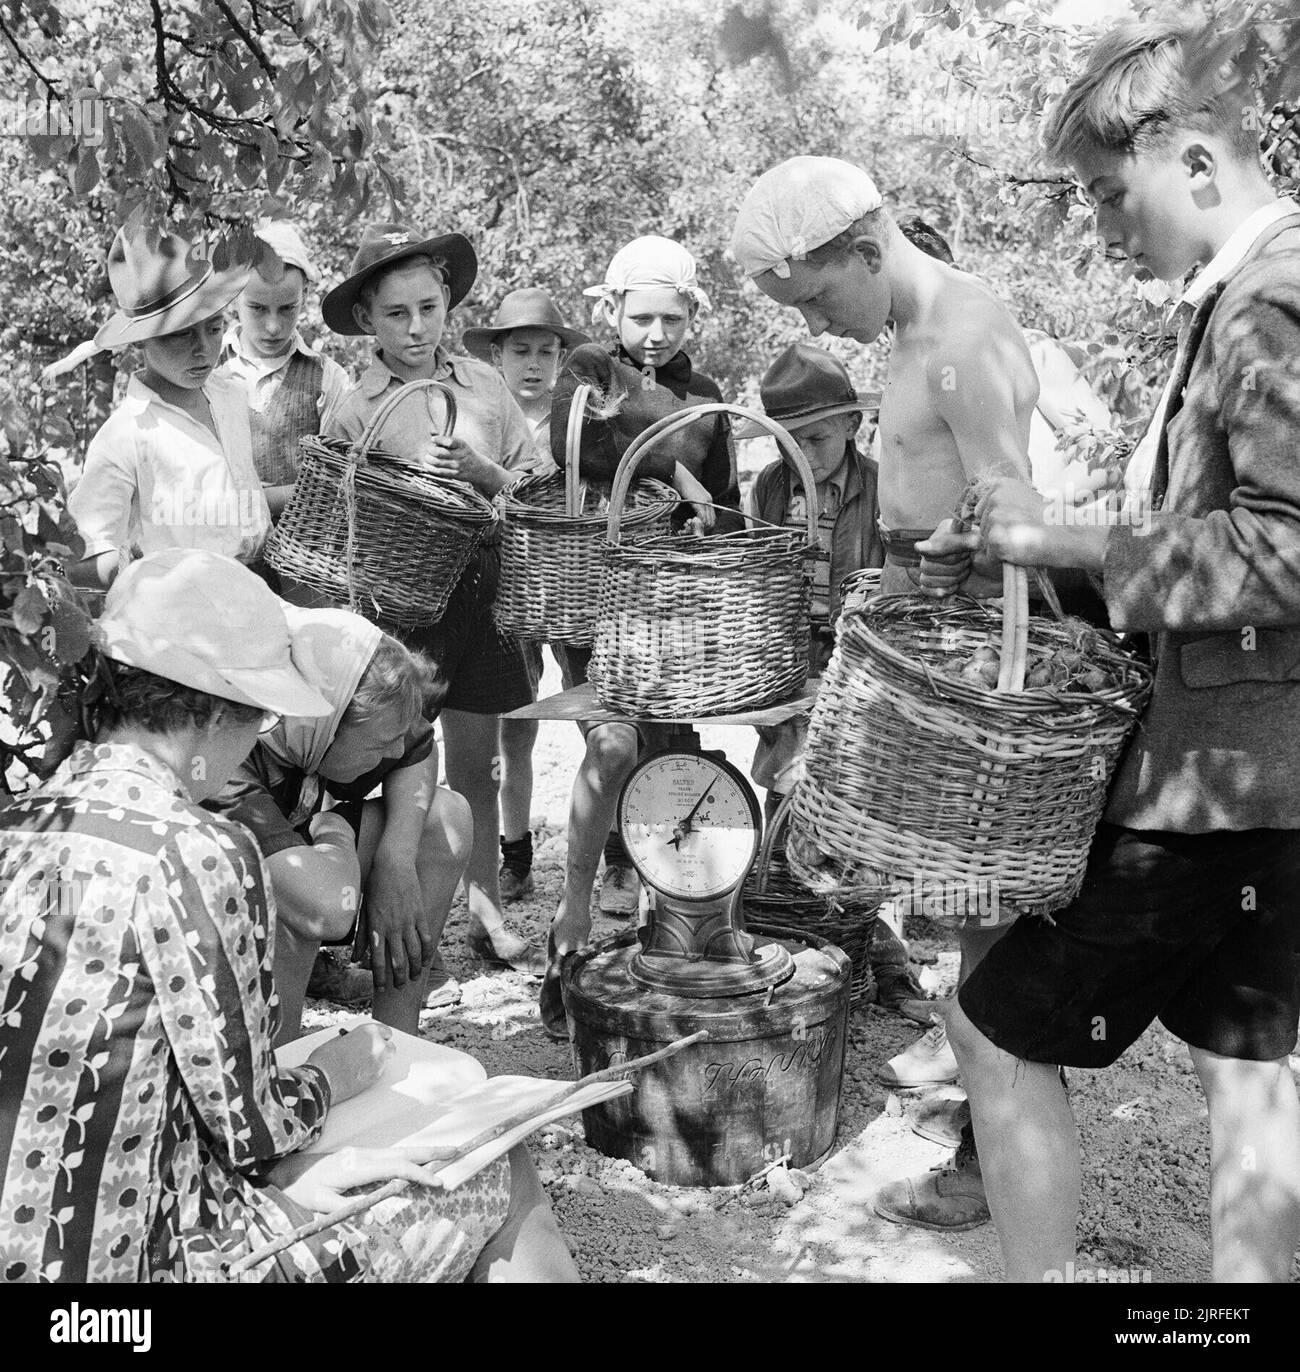 Boy Scouts bring in baskets of plums for weighing on the fruit-picking farm near Cambridge in 1944. The boys gather in the dappled shade of the trees to present their baskets of plums to the female representative of the jam company to be weighed. The fruit is weighed by the pound and the weights are entered into a ledger before the baskets are emptied into the firm's bushel baskets for collection. Stock Photo